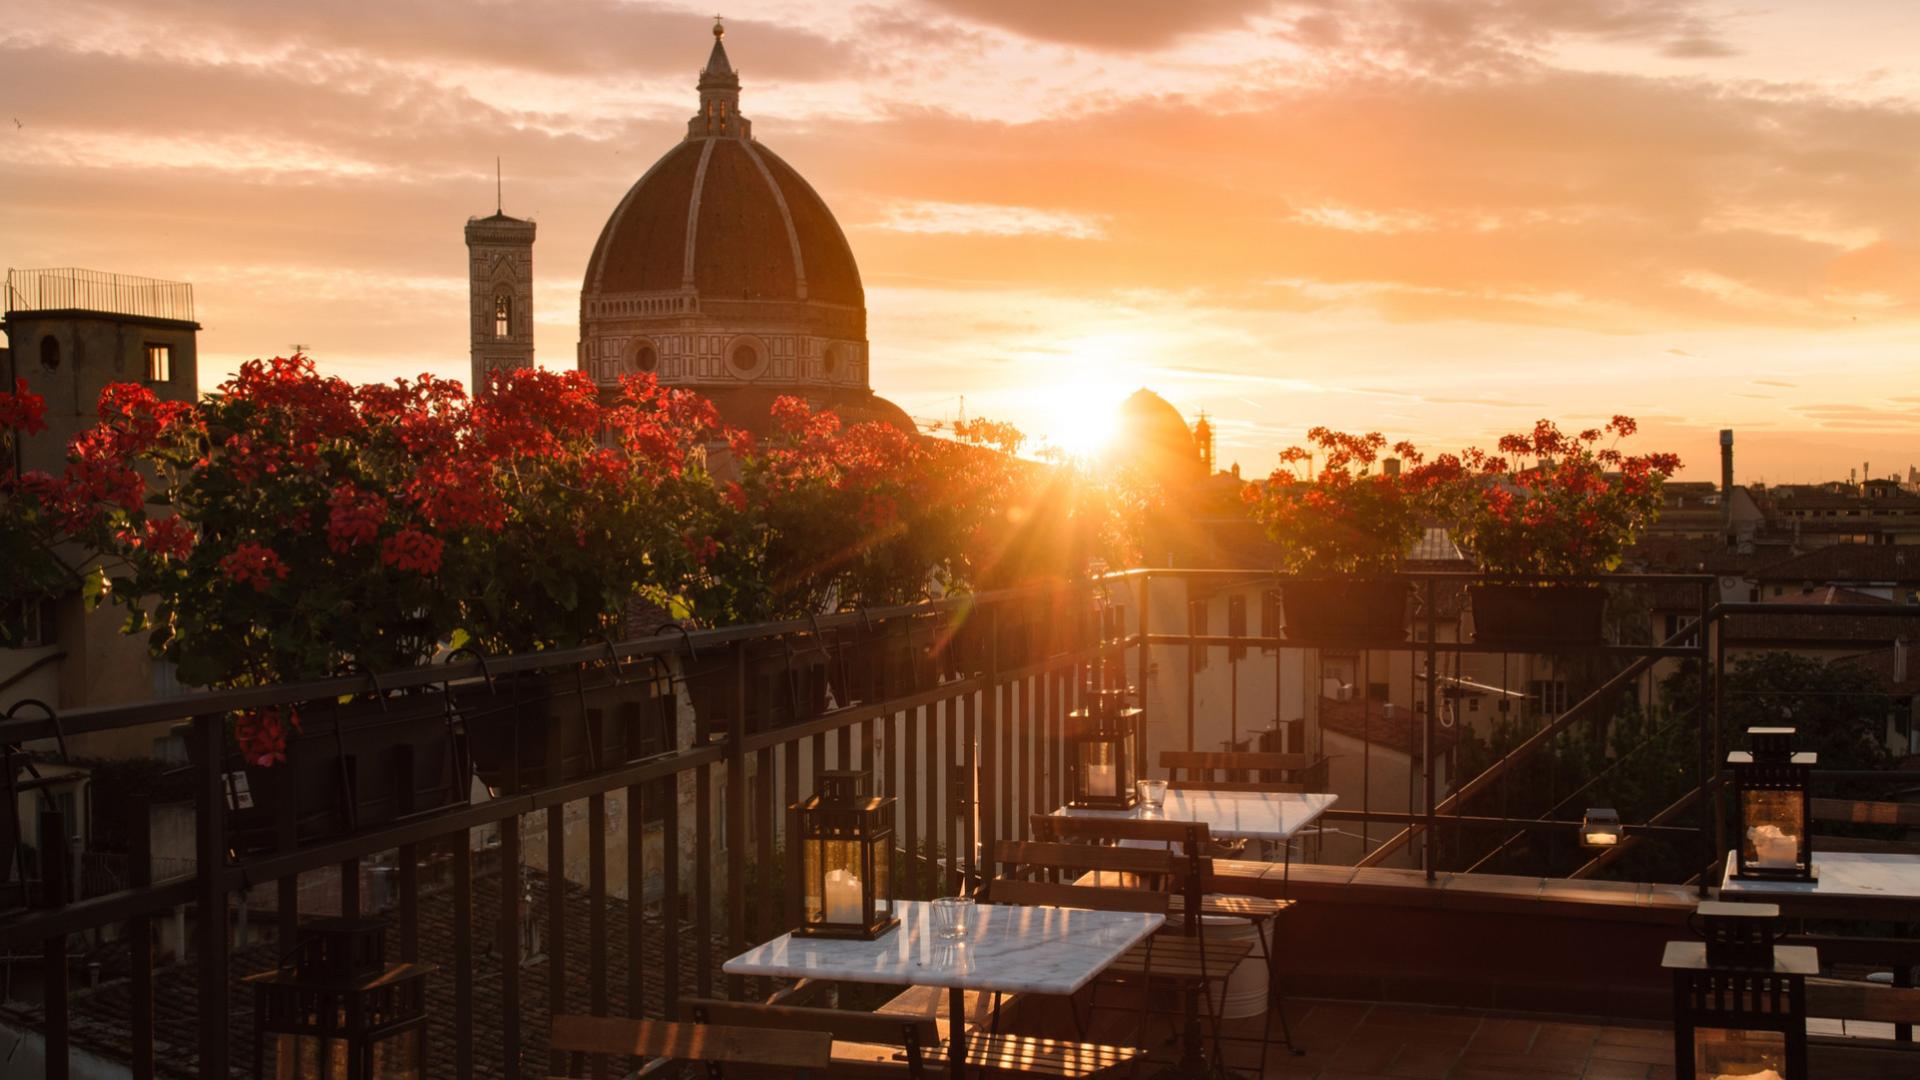 Terrace with a view of Florence's Duomo at sunset.